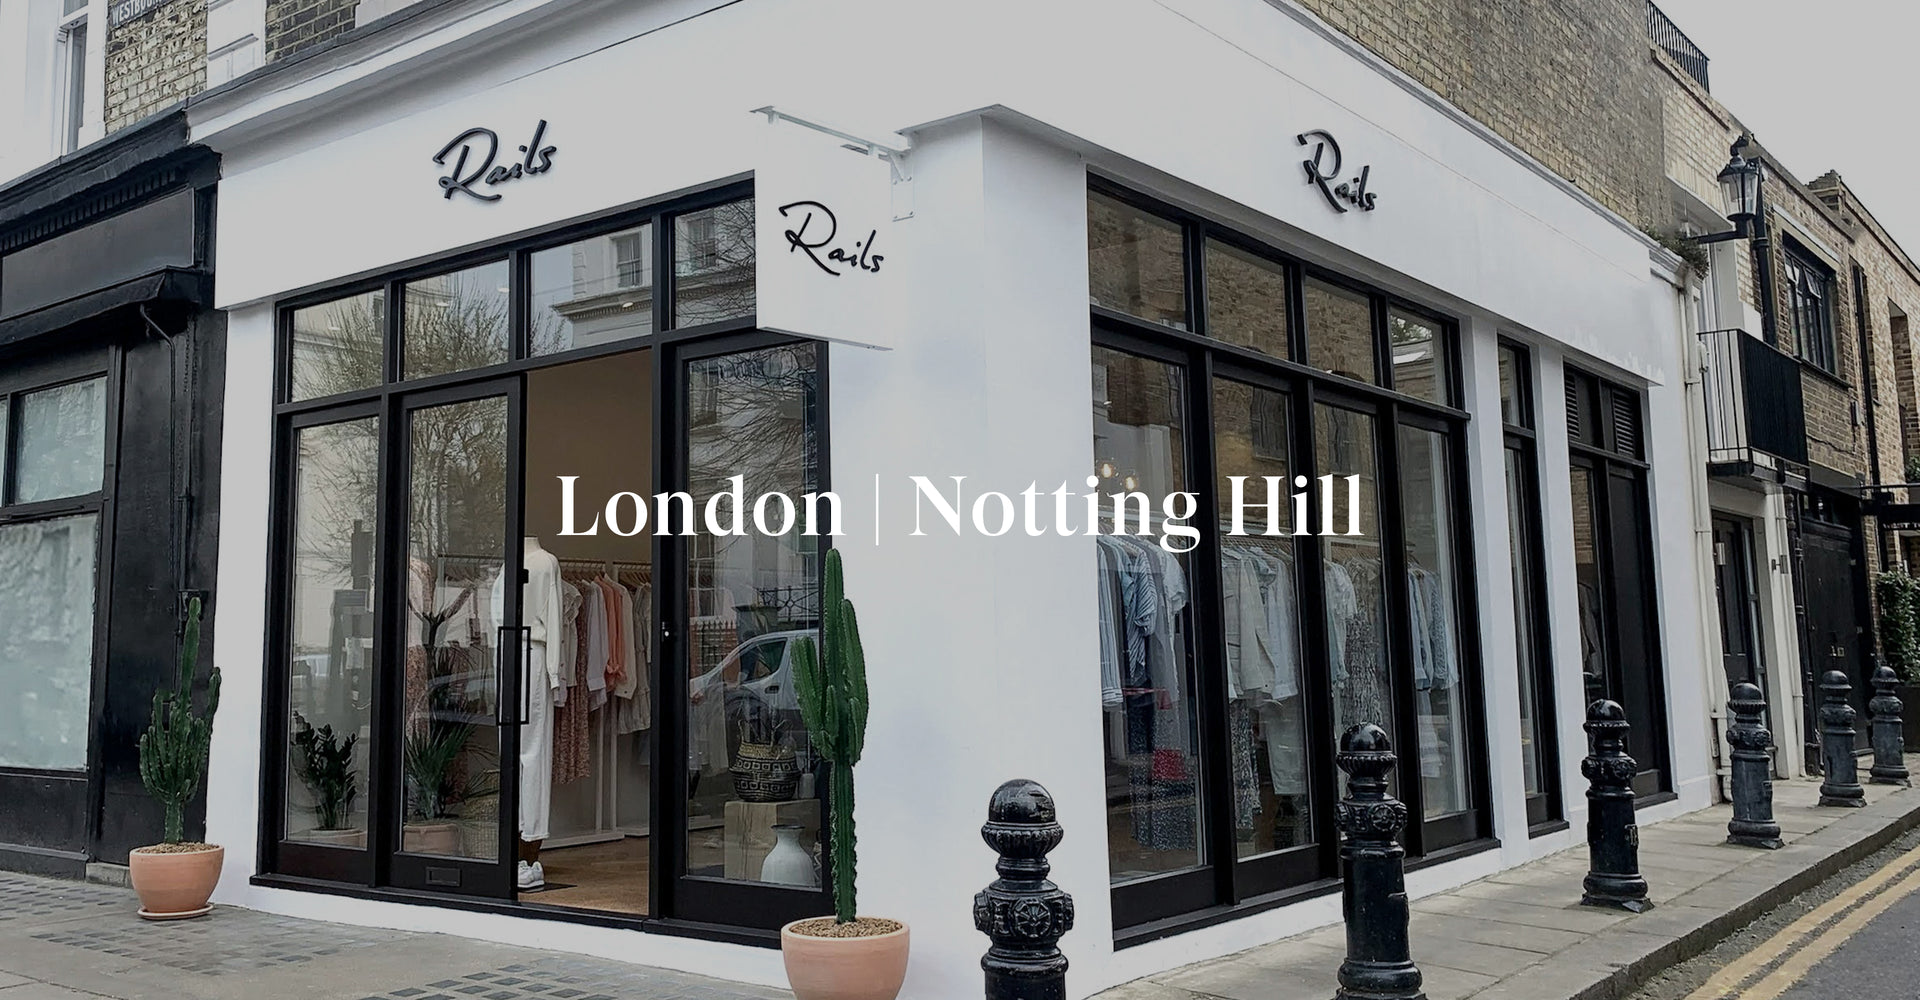 IMAGE SHOWS OUTSIDE OF LONDON NOTTING HILL STORE